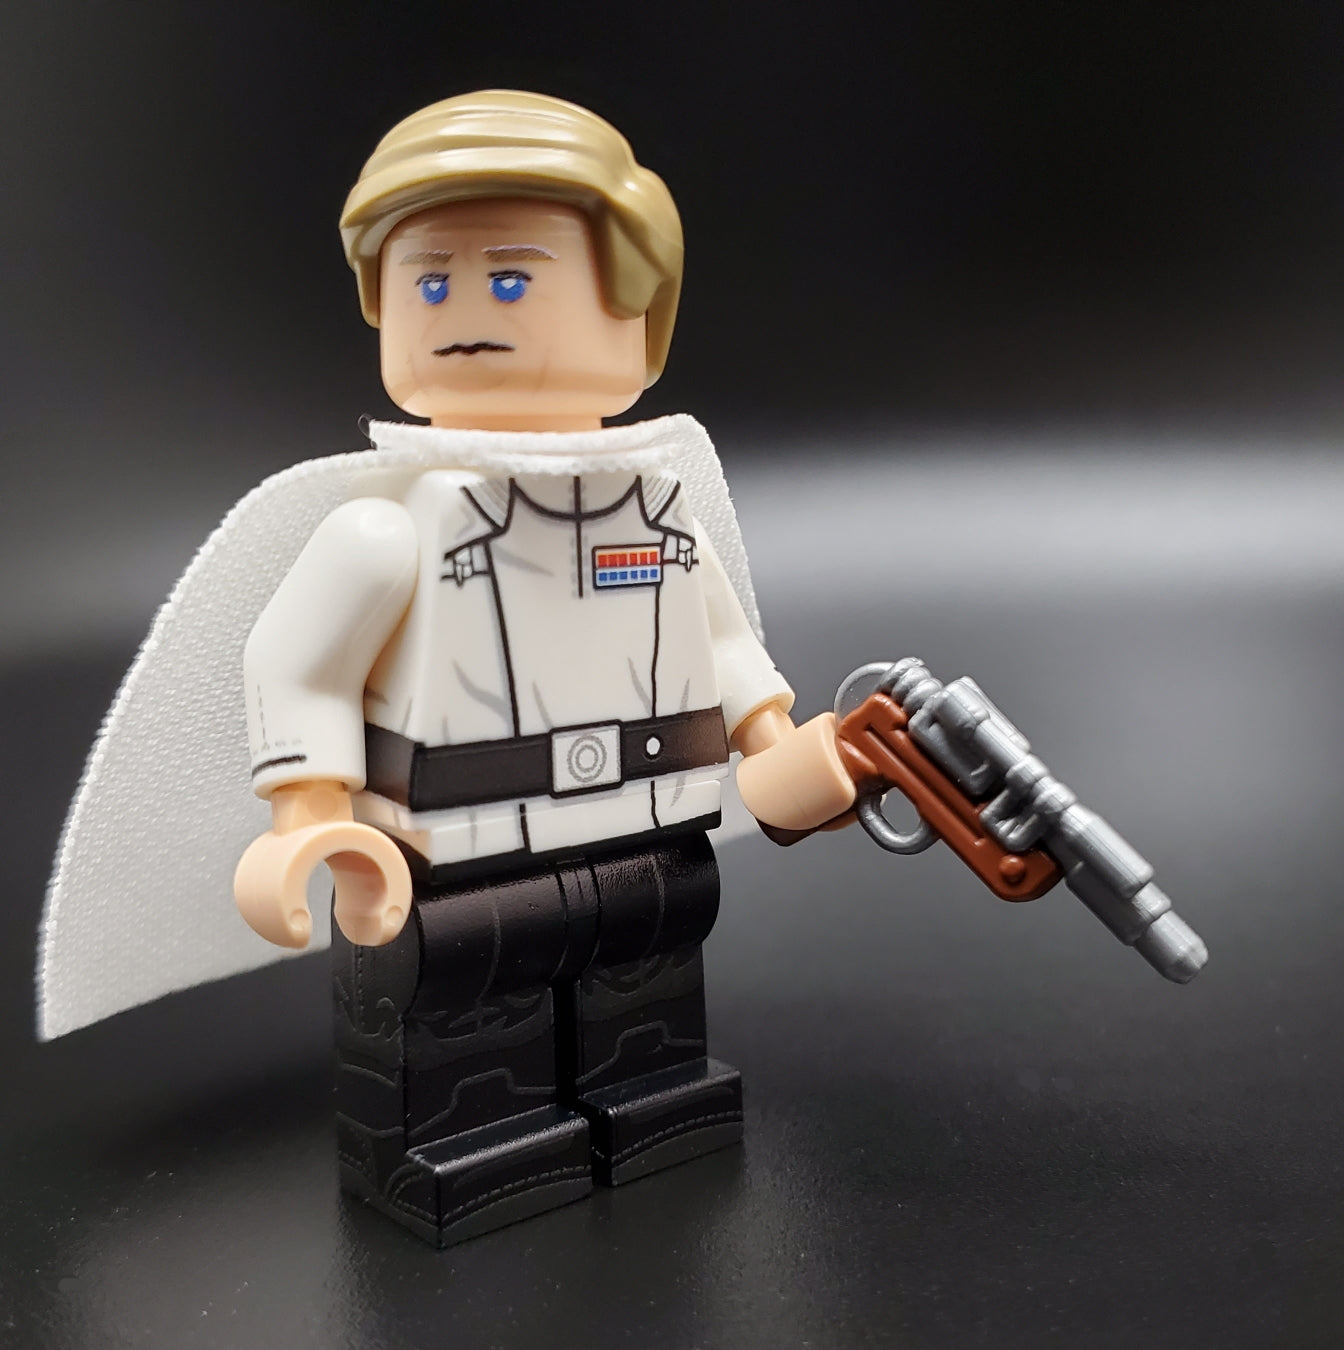 The Director - The Minifig Co.